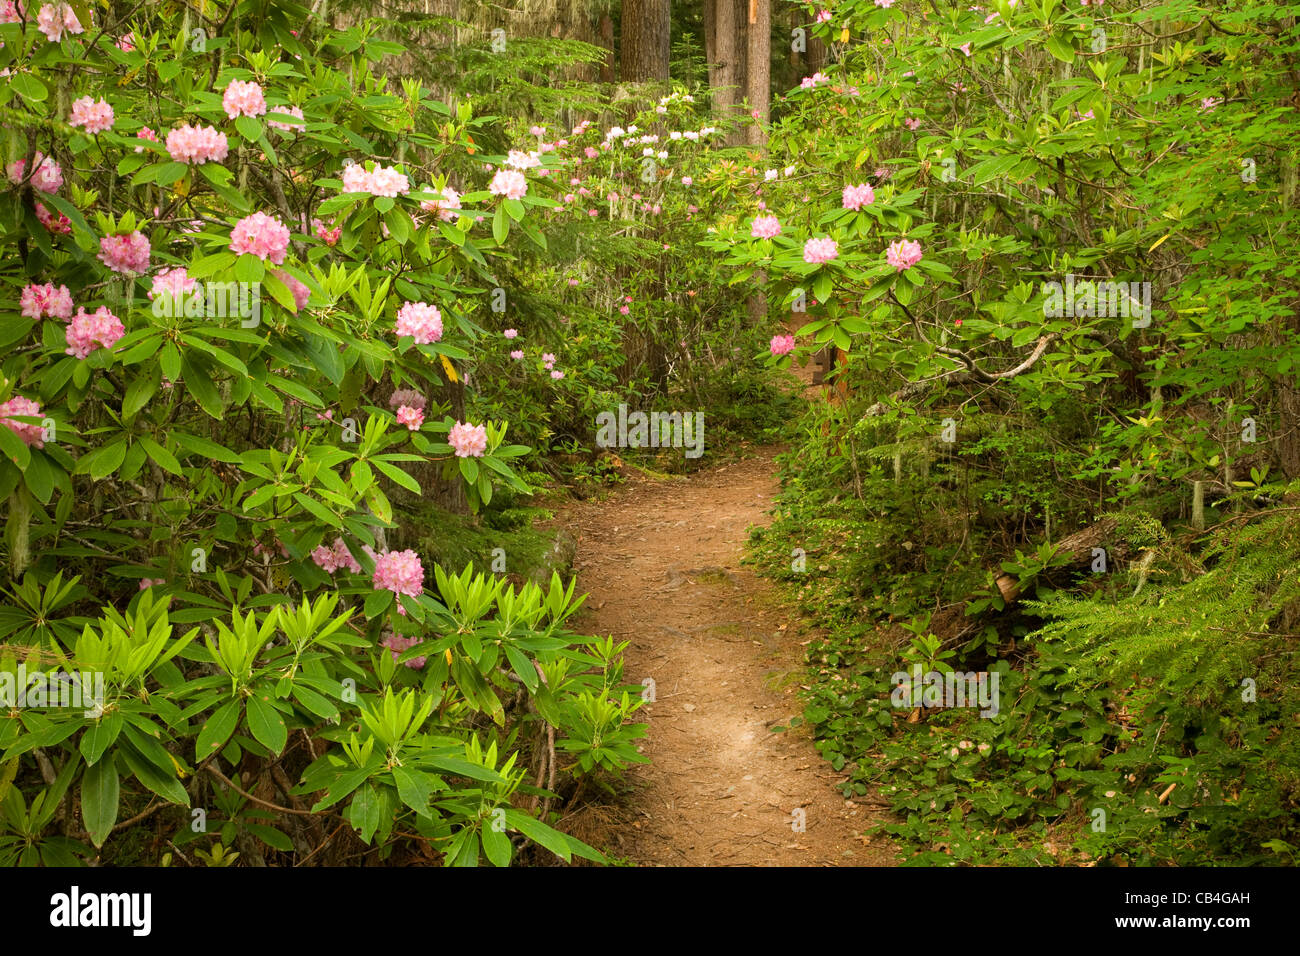 WASHINGTON - Native rhododendrons blooming along the Mount Zion Trail in Olympic National Forest. Stock Photo